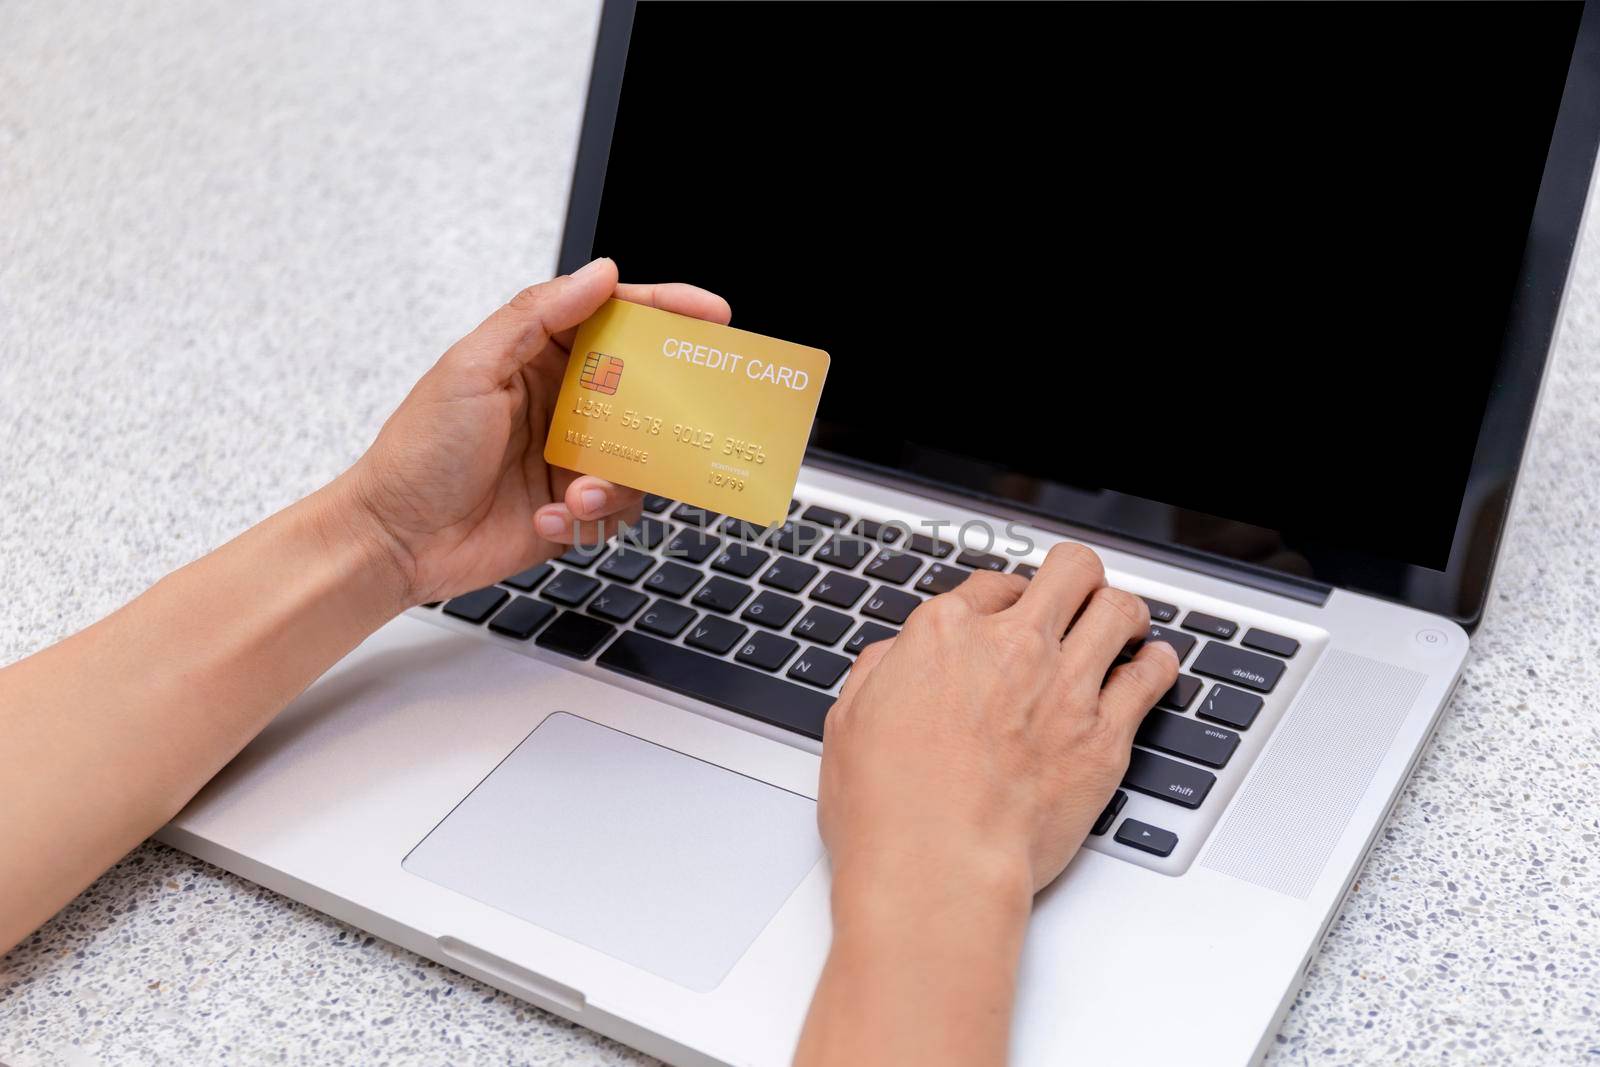 Young woman holding credit card and using laptop computer. Women working at home. Online shopping, e-commerce, internet banking, spending money, working from home concept. Technology shopping online concept. by Satrinekarn